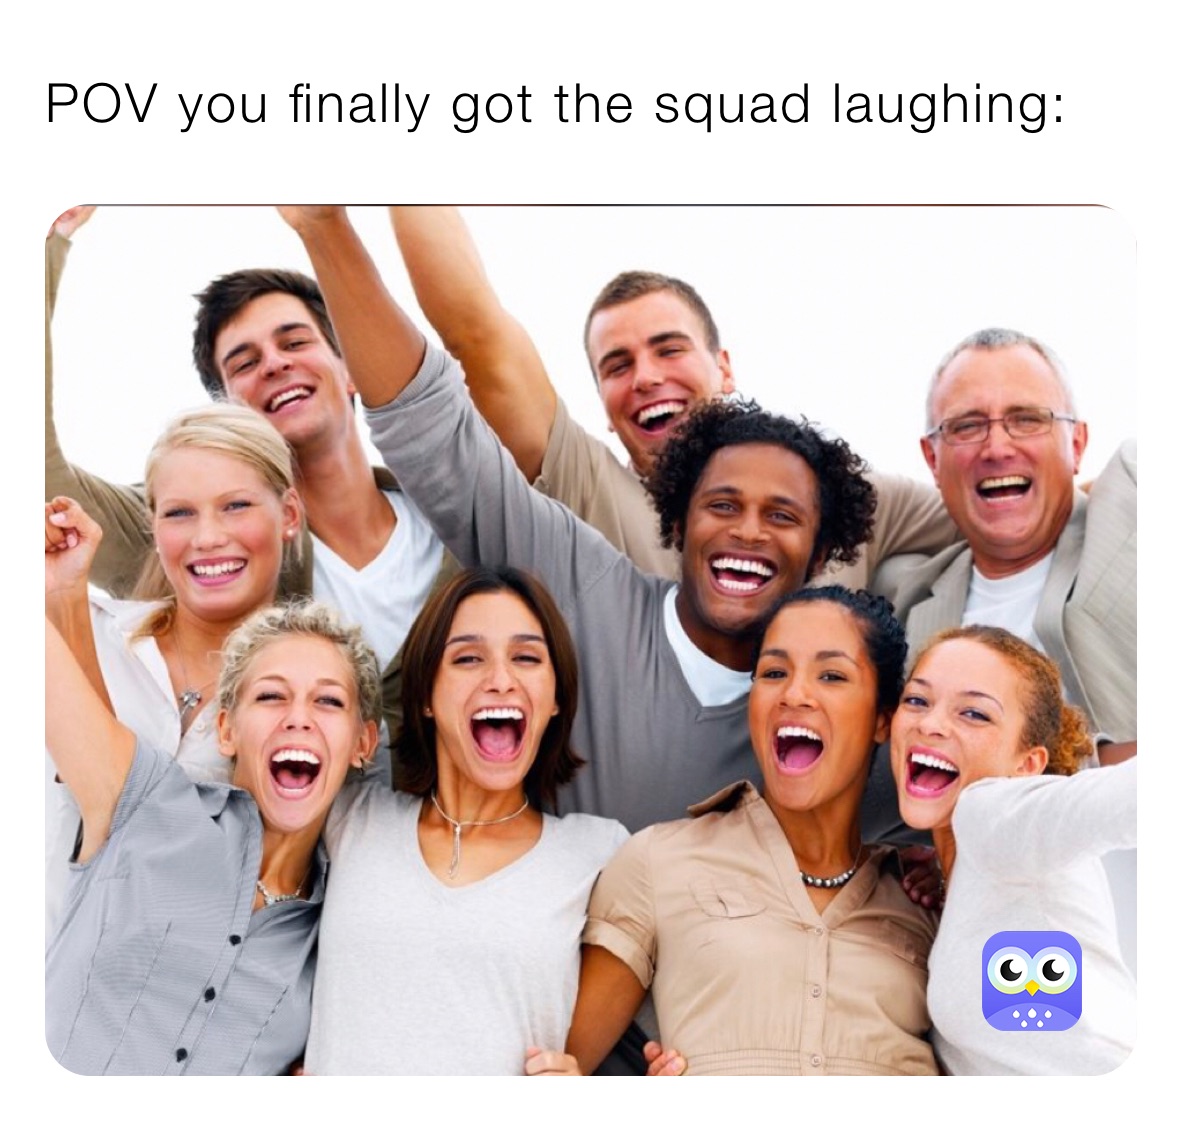 POV you finally got the squad laughing: